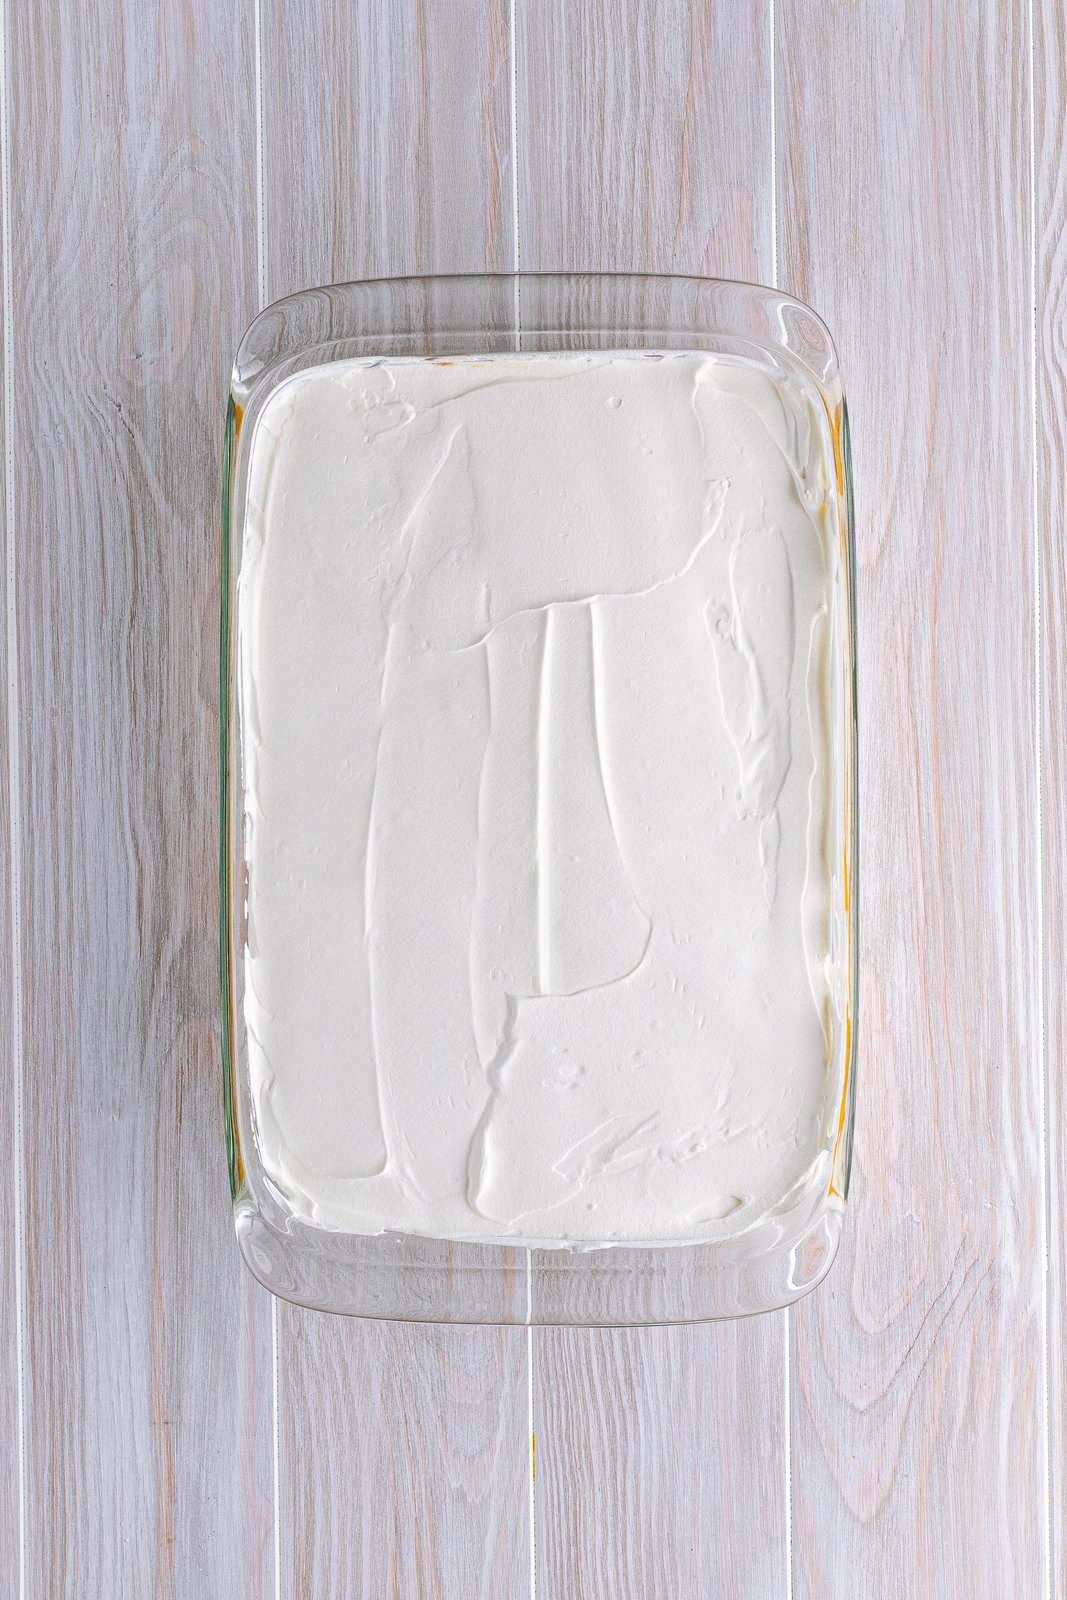 Pudding topped with whipped topping.